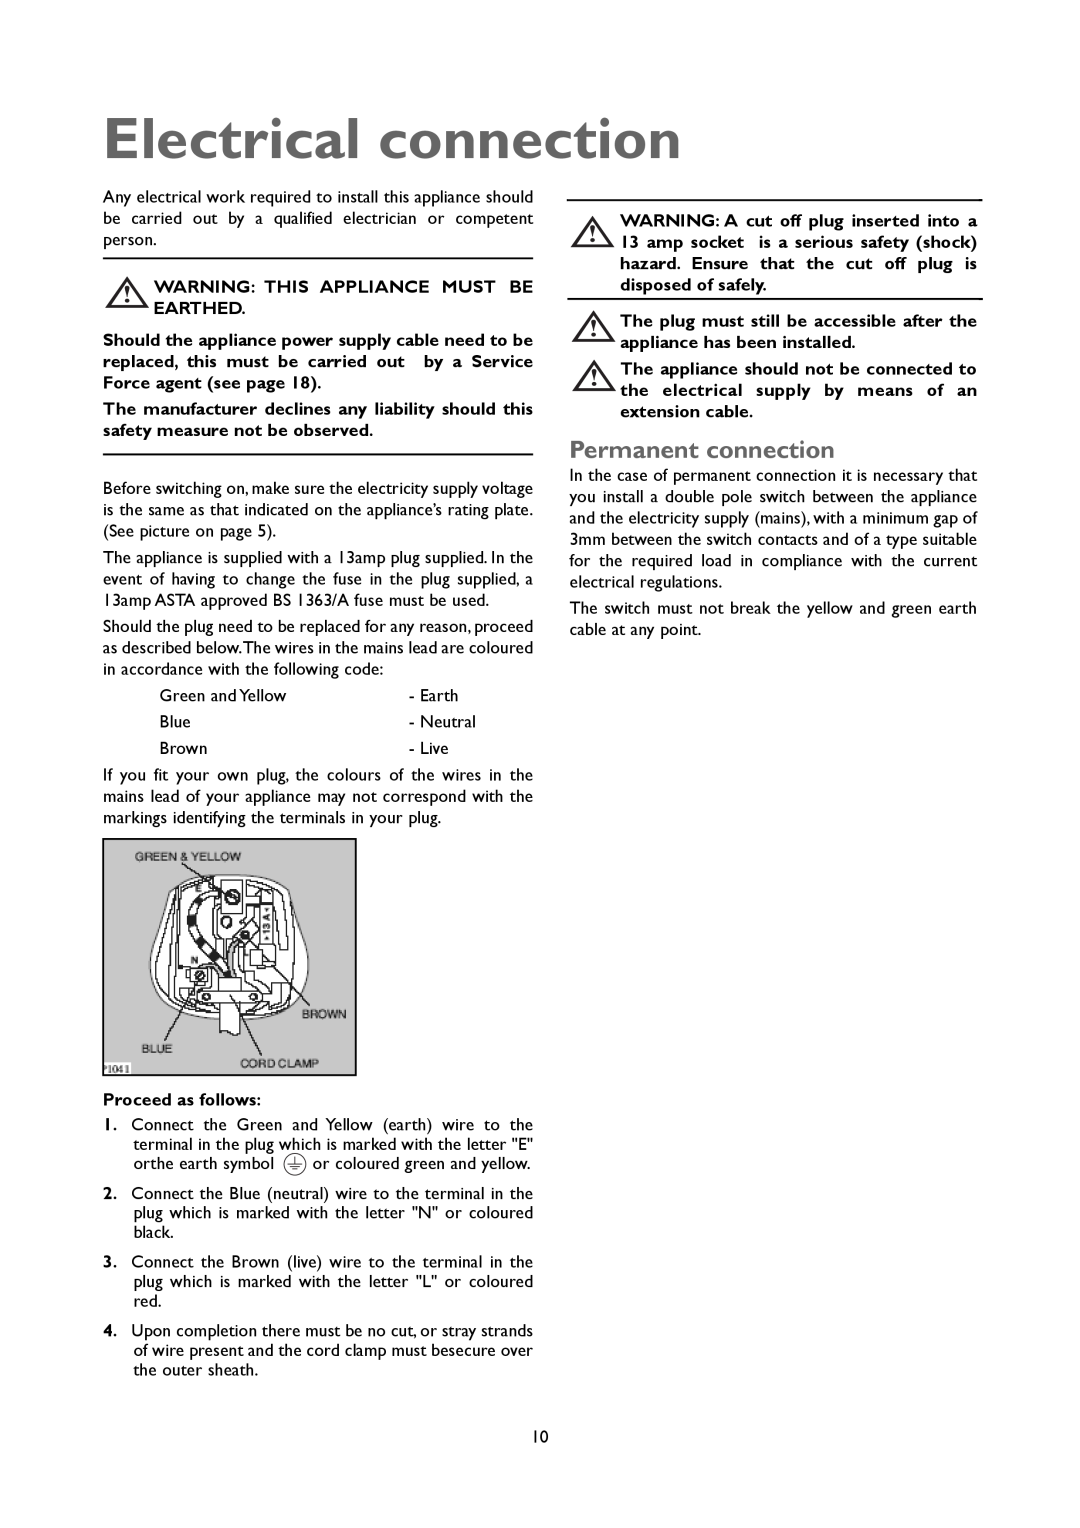 John Lewis JLUCFRW6001 instruction manual Electrical connection, Permanent connection 